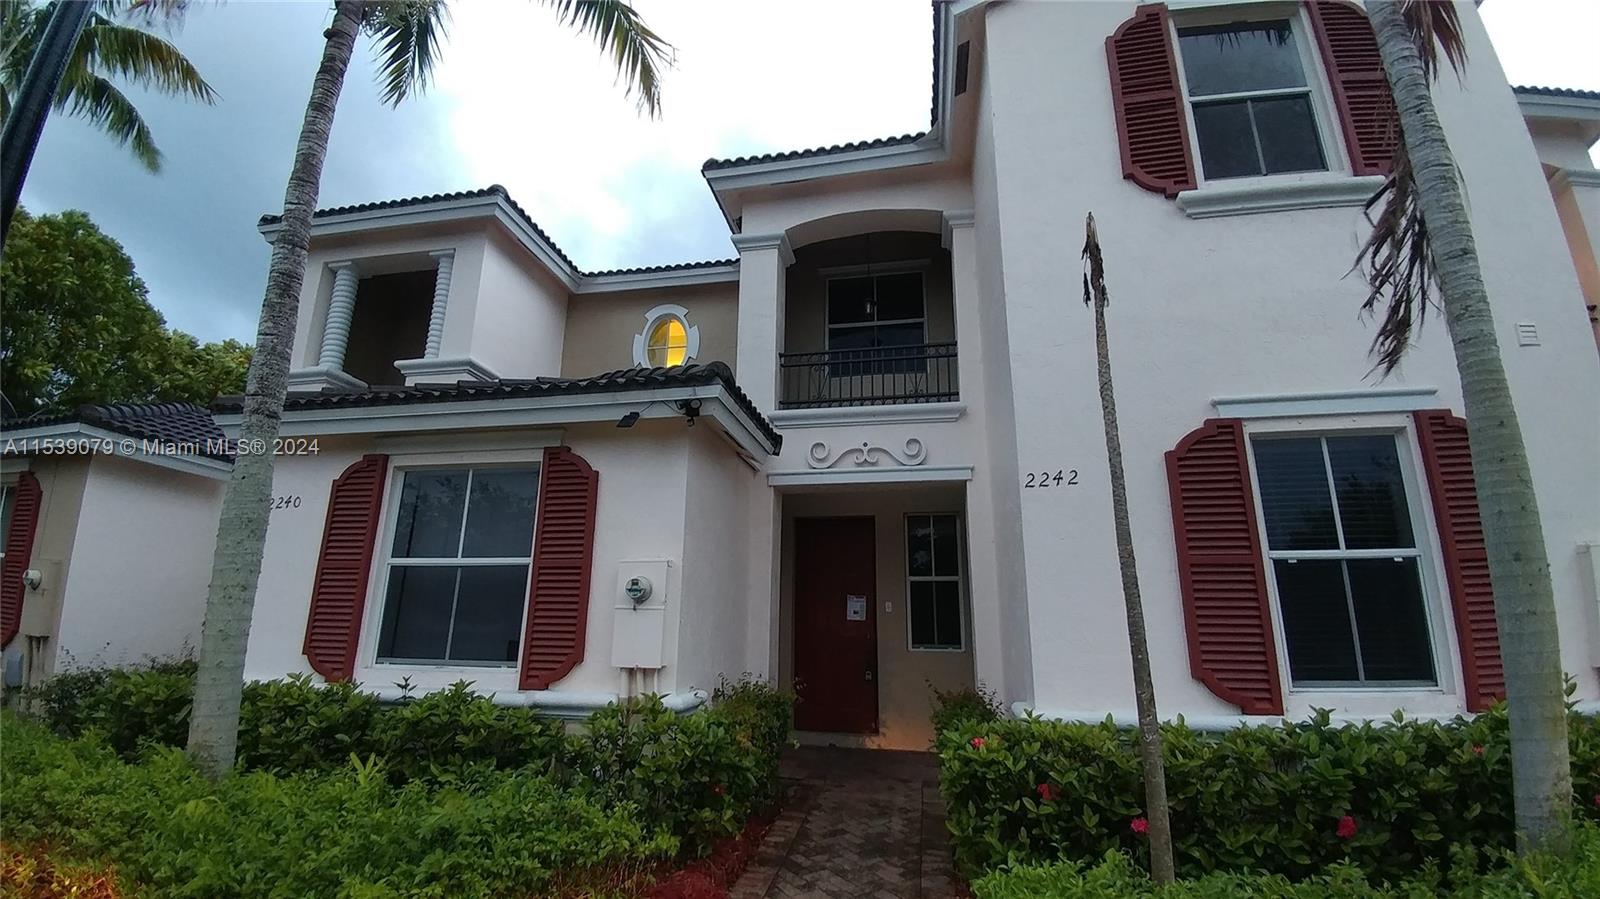 View Homestead, FL 33033 townhome